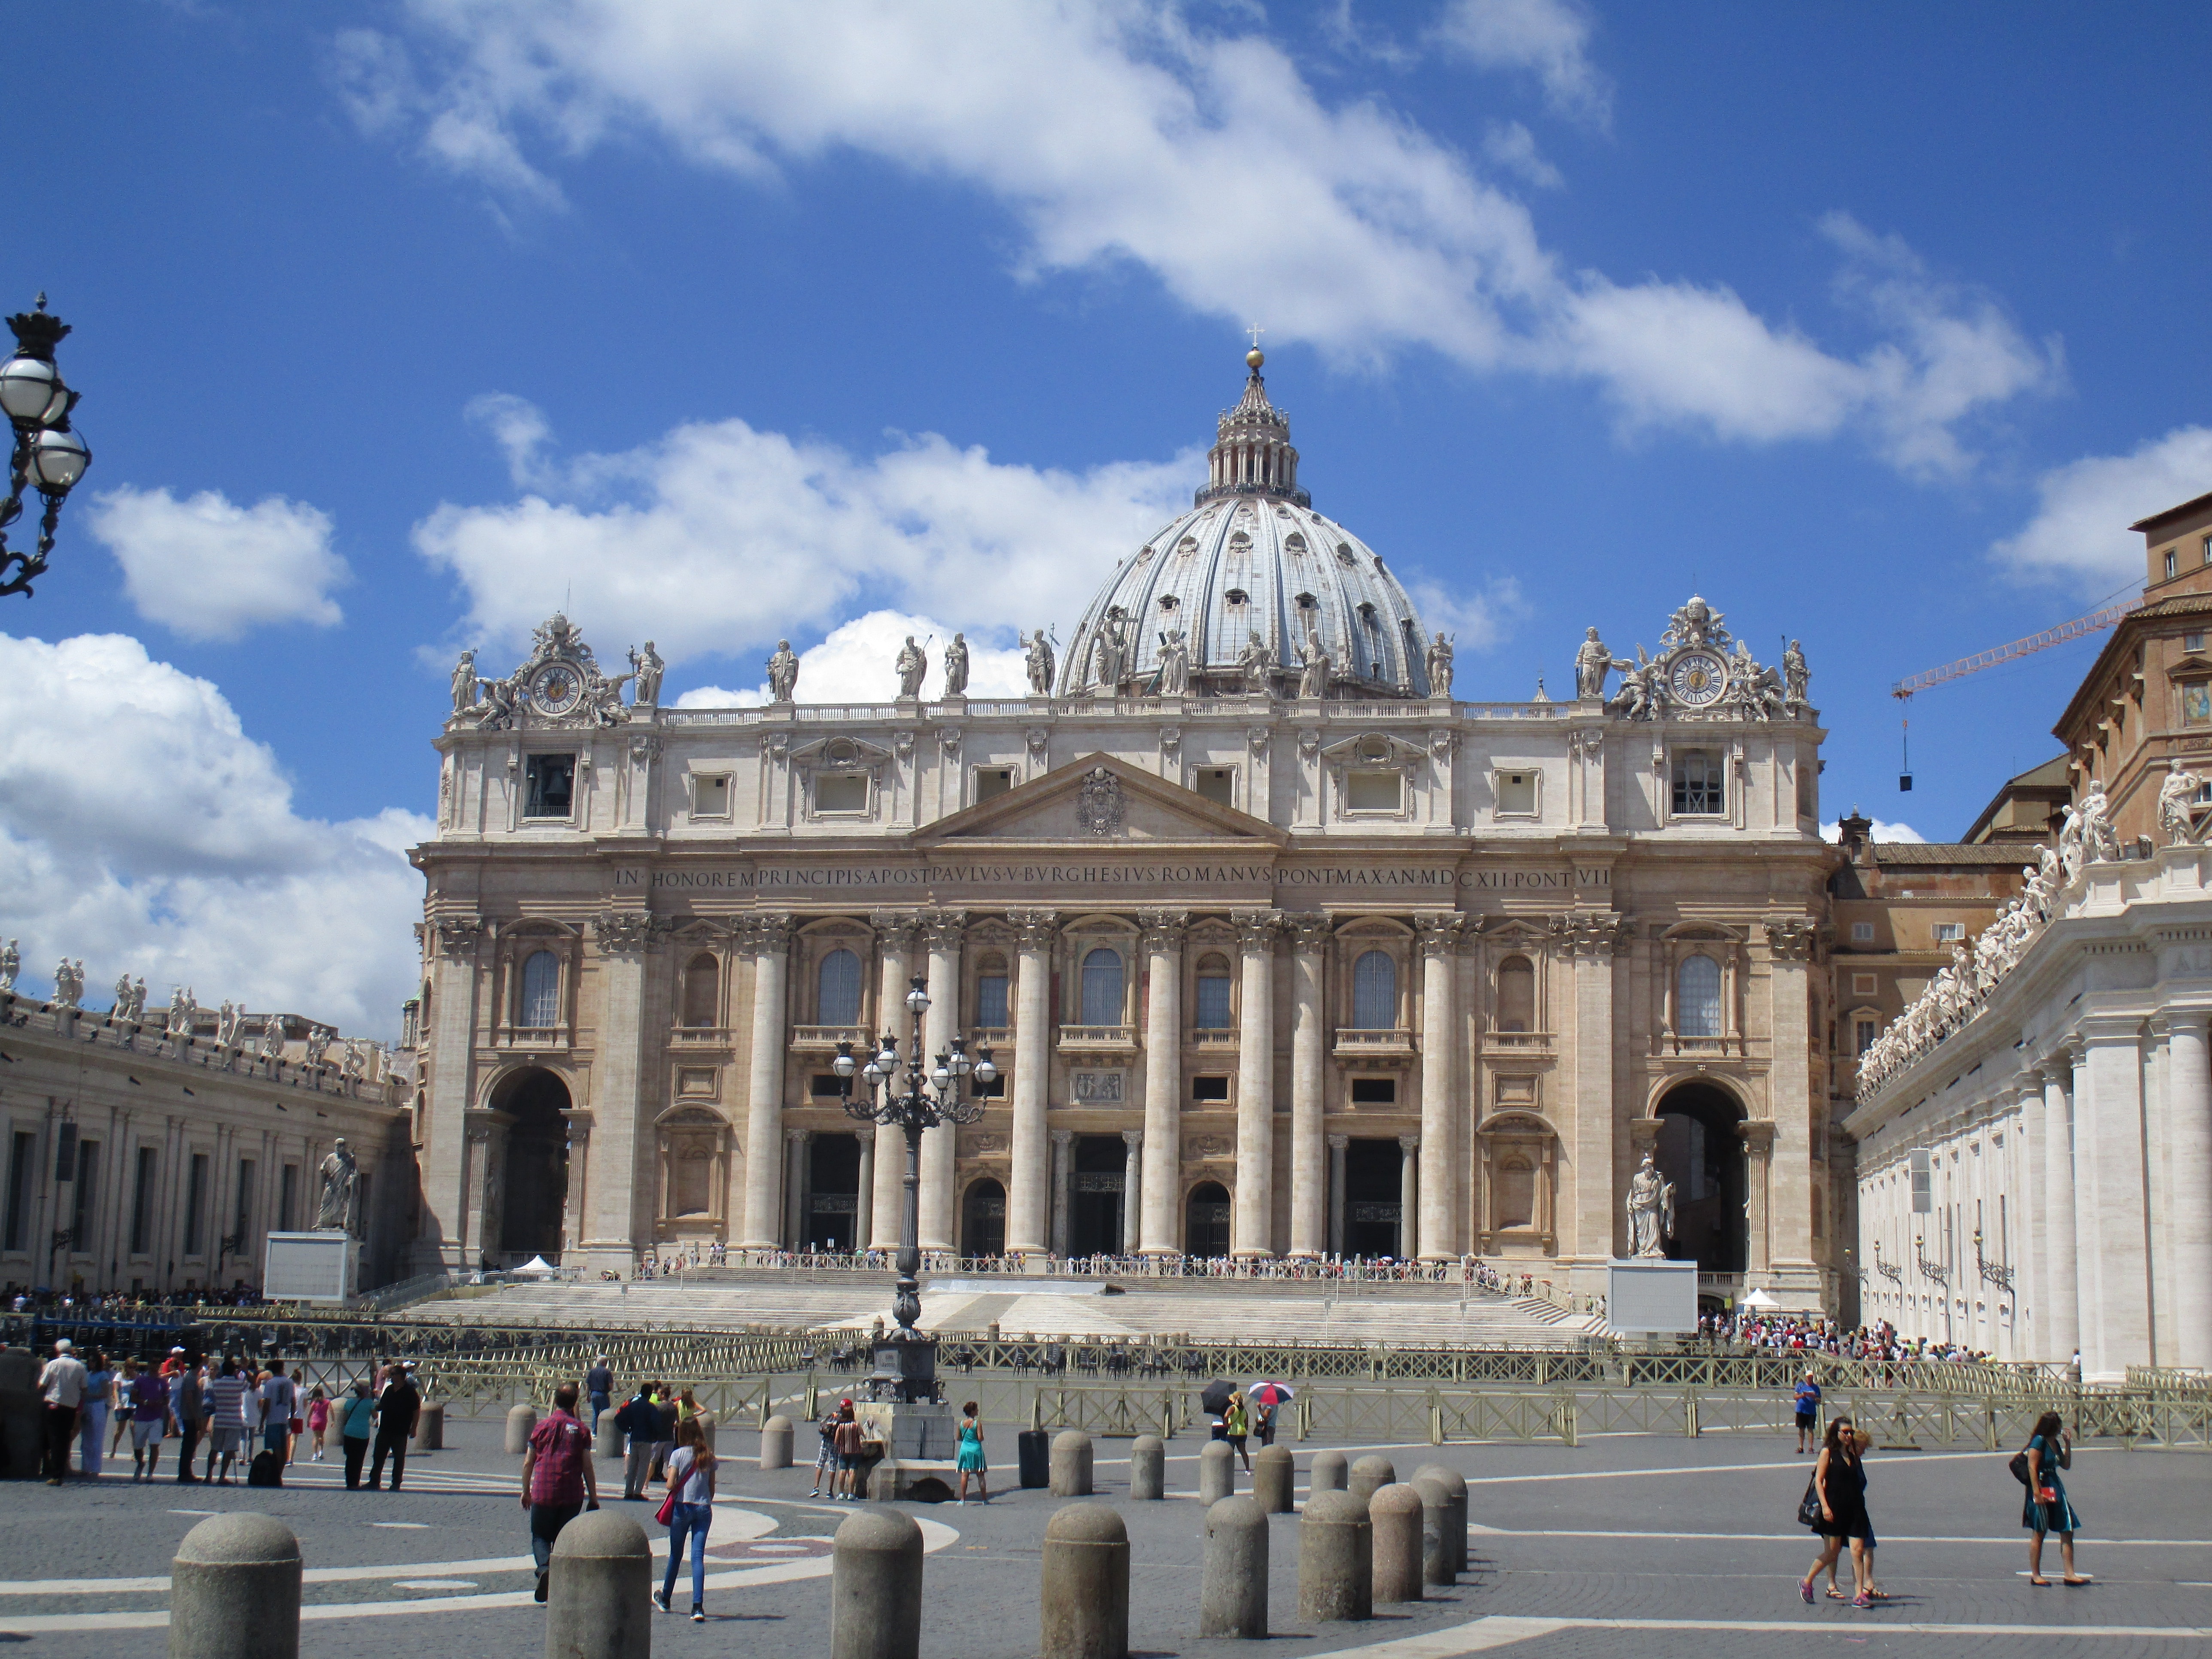 St. Peter's Basilica - A Glimpse of Ancient Beauty